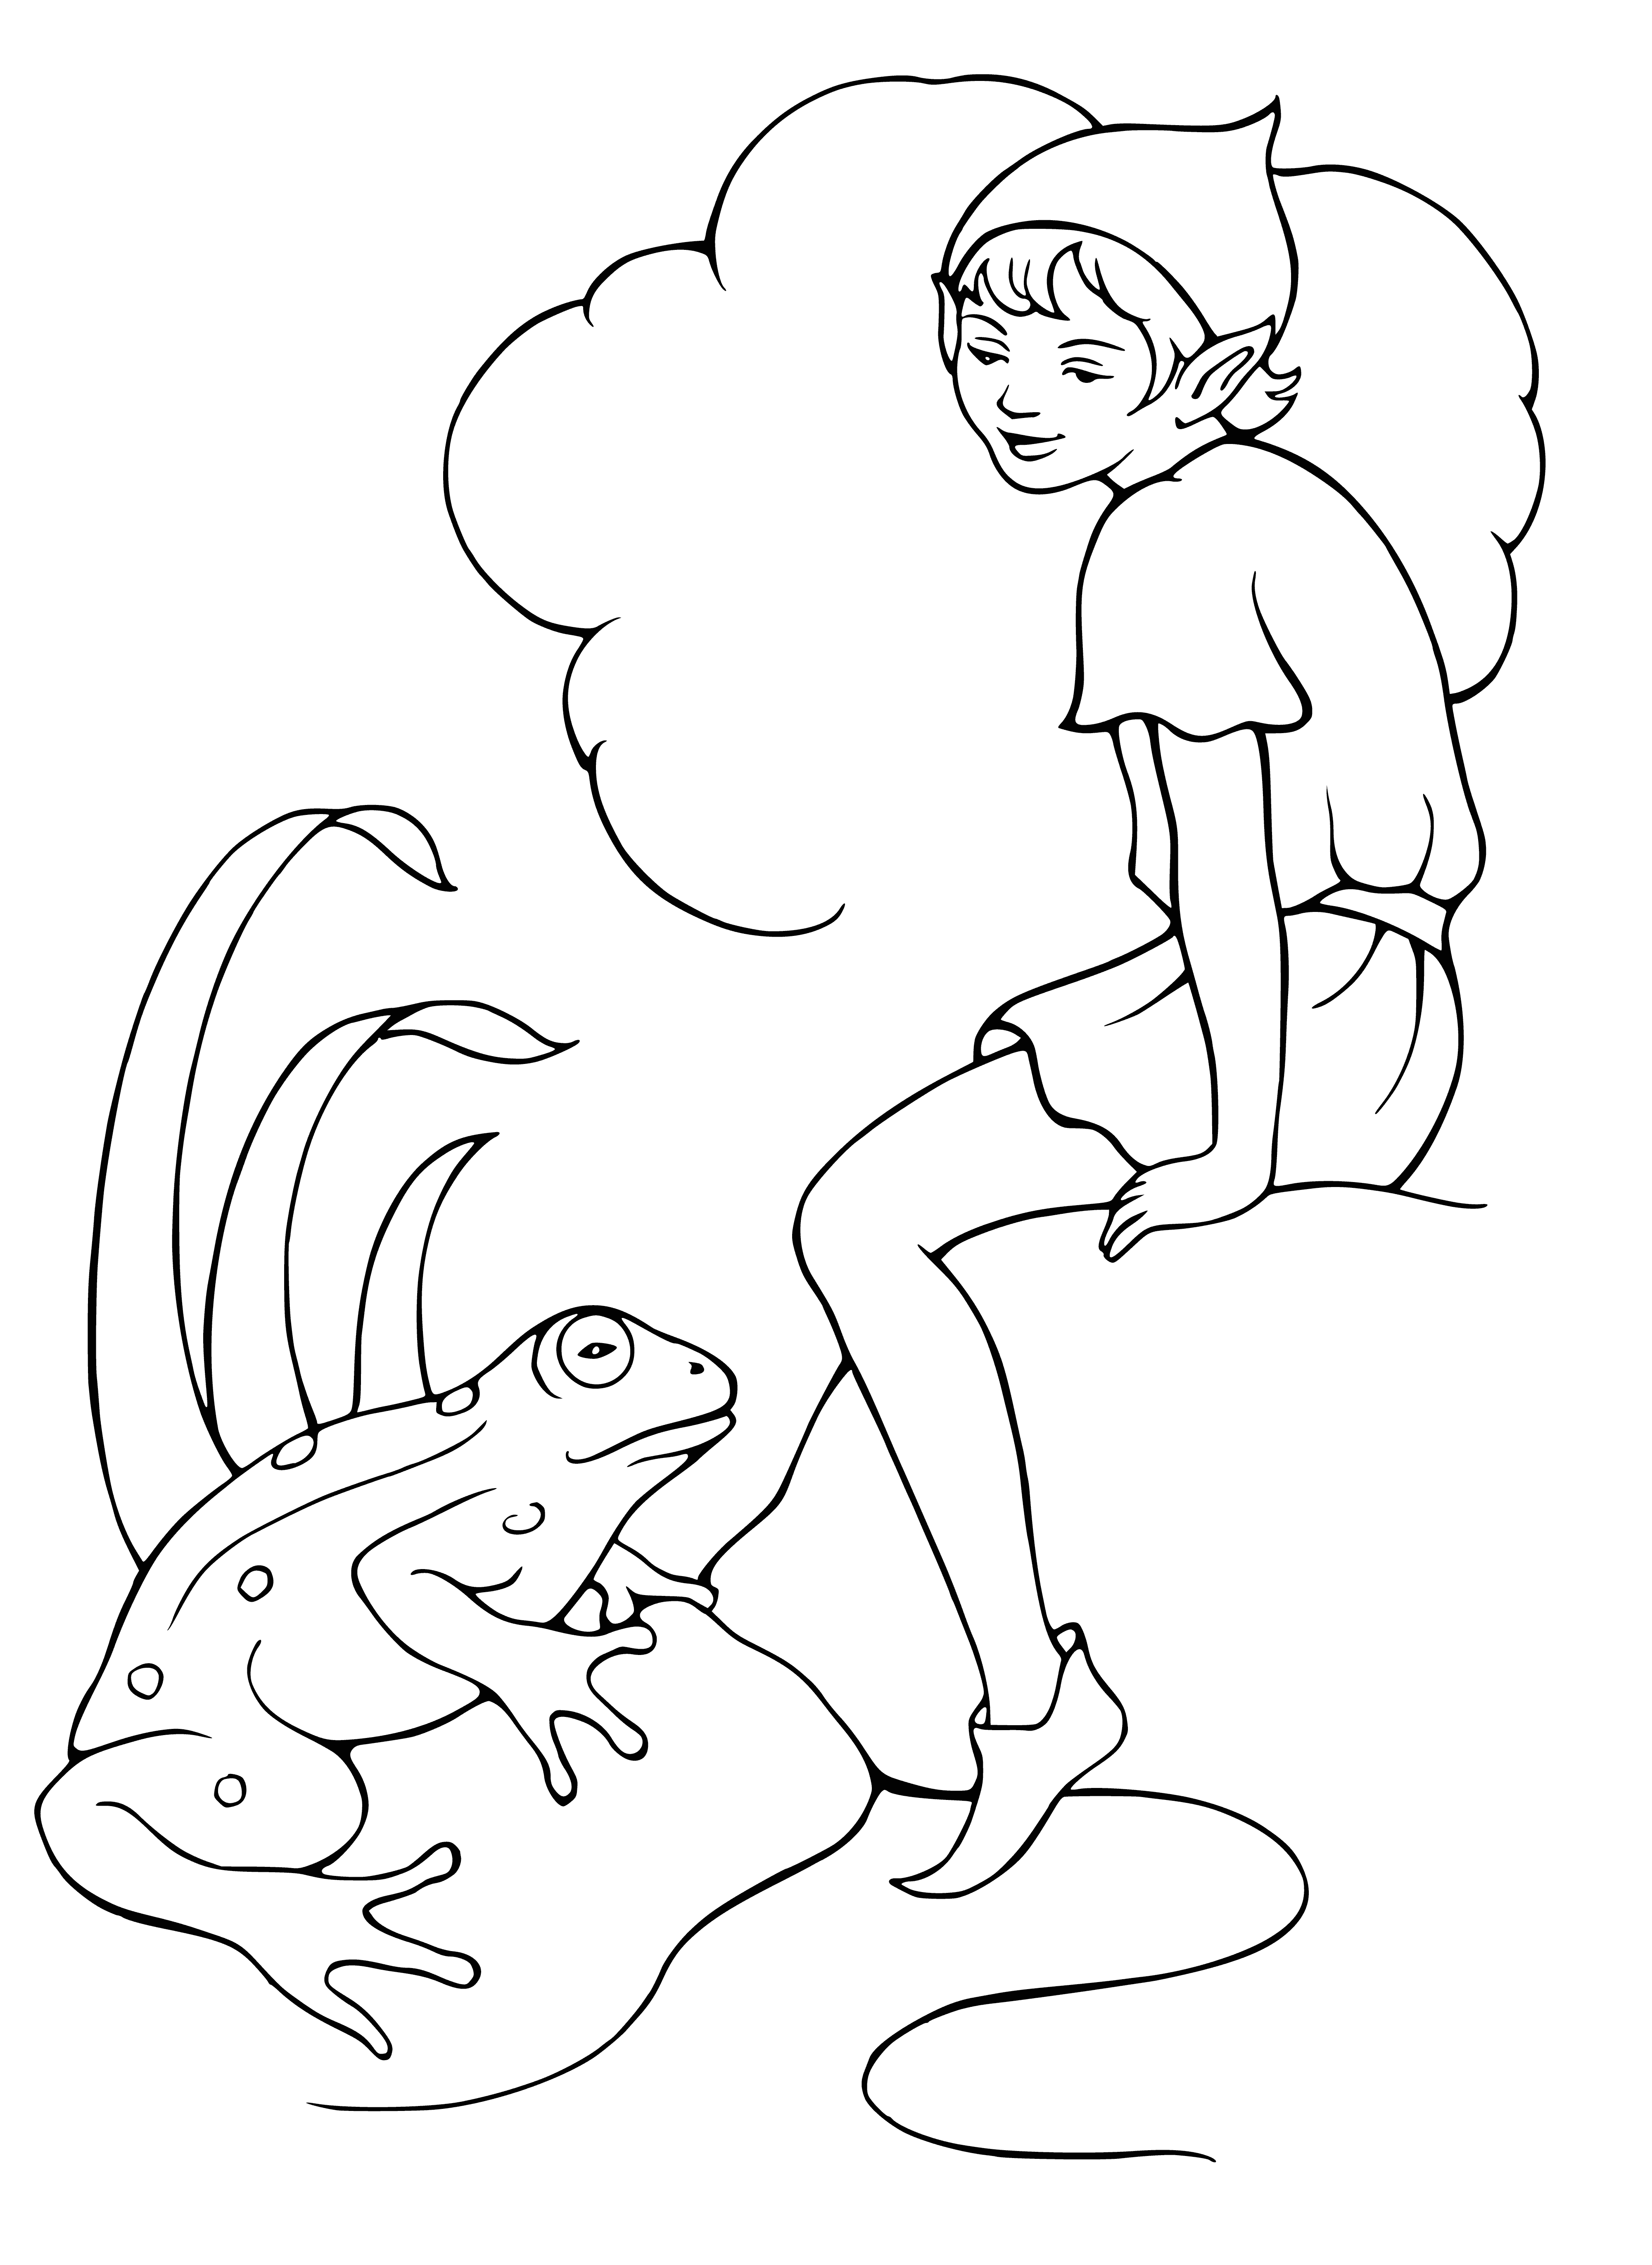 coloring page: Elf sits by water, stares. Pointy ears, green tunic.